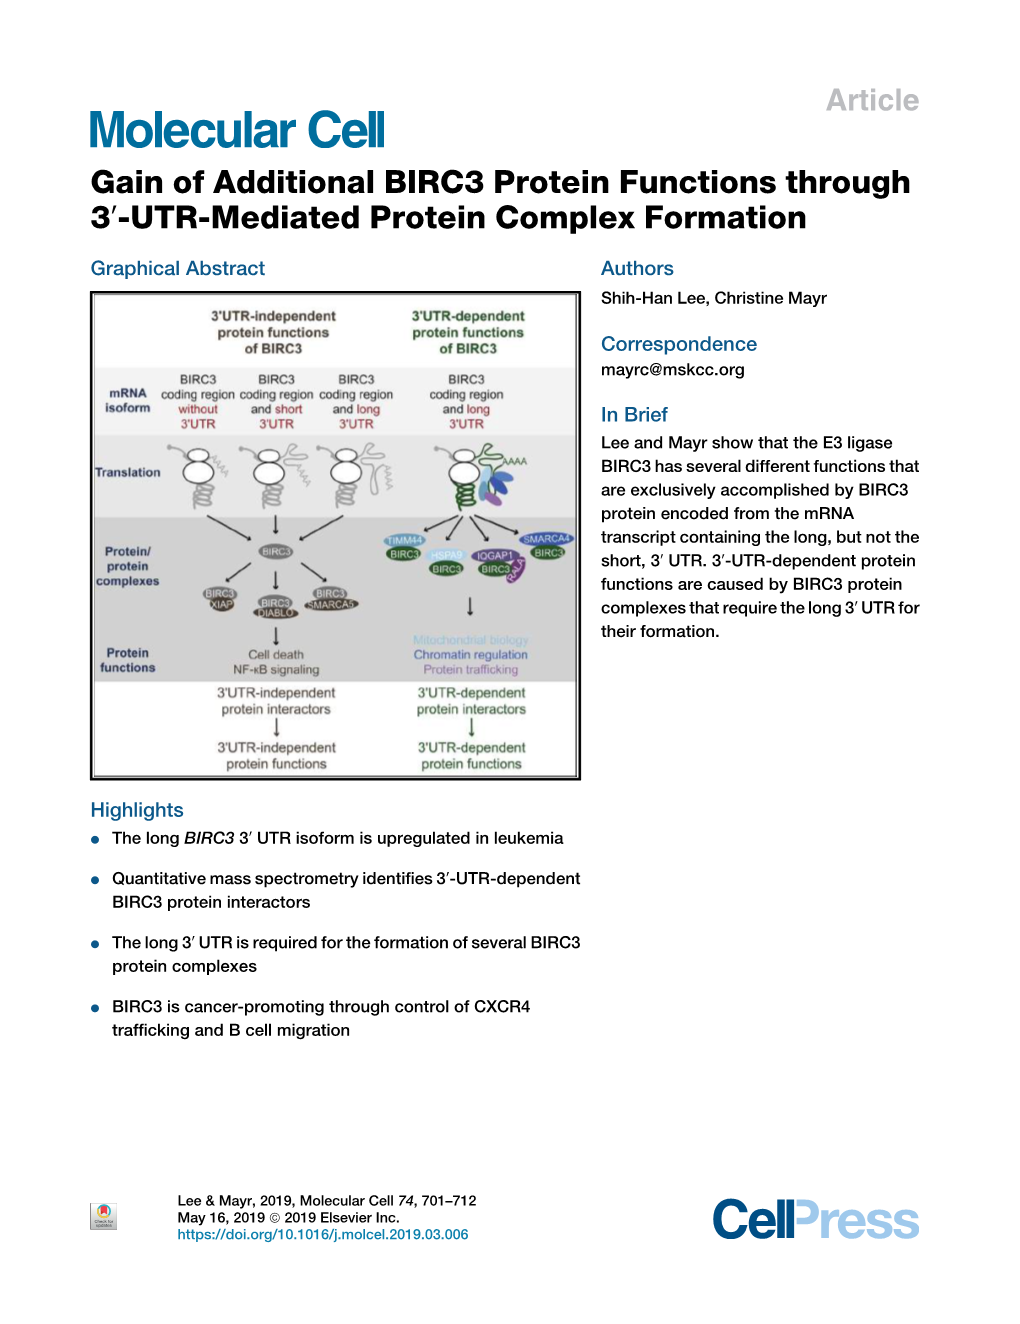 Gain of Additional BIRC3 Protein Functions Through 3ʹ-UTR-Mediated Protein Complex Formation